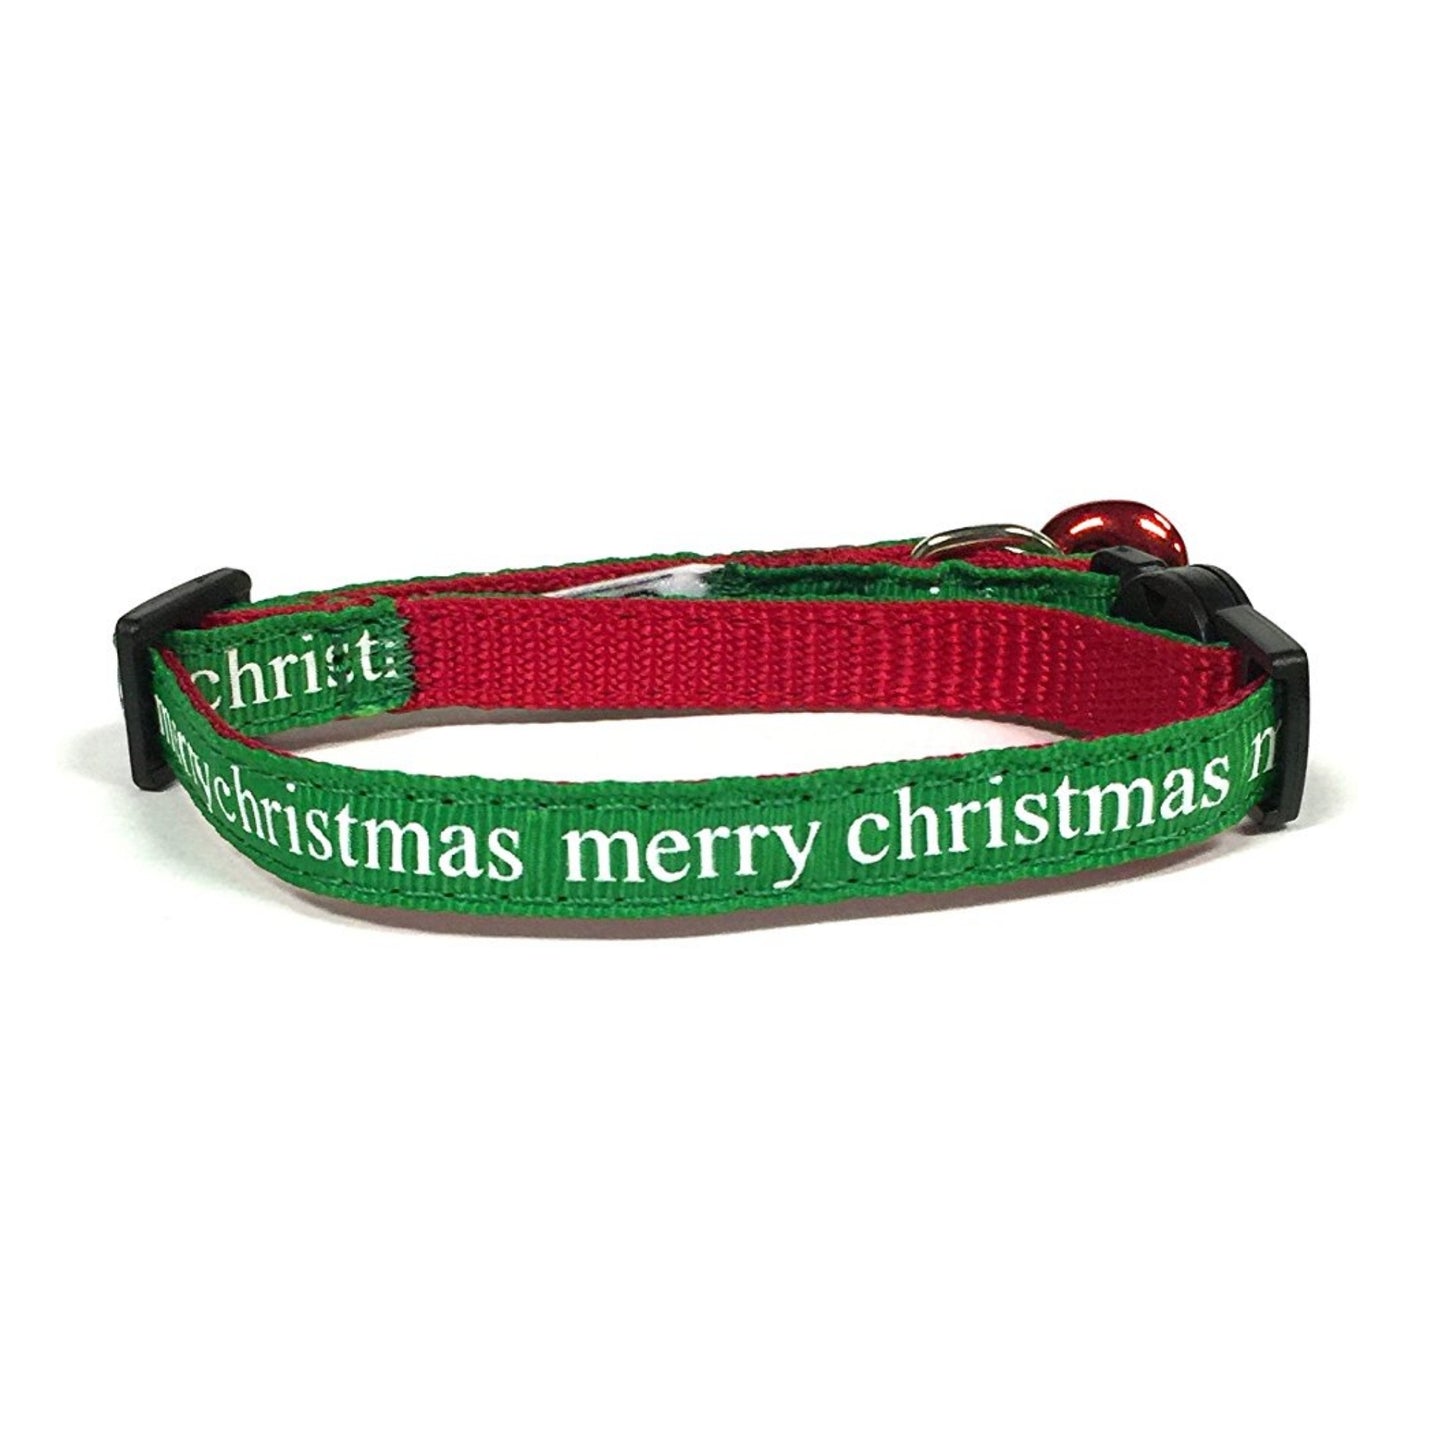 Midlee Merry Christmas Cat Collar with Safety Buckle